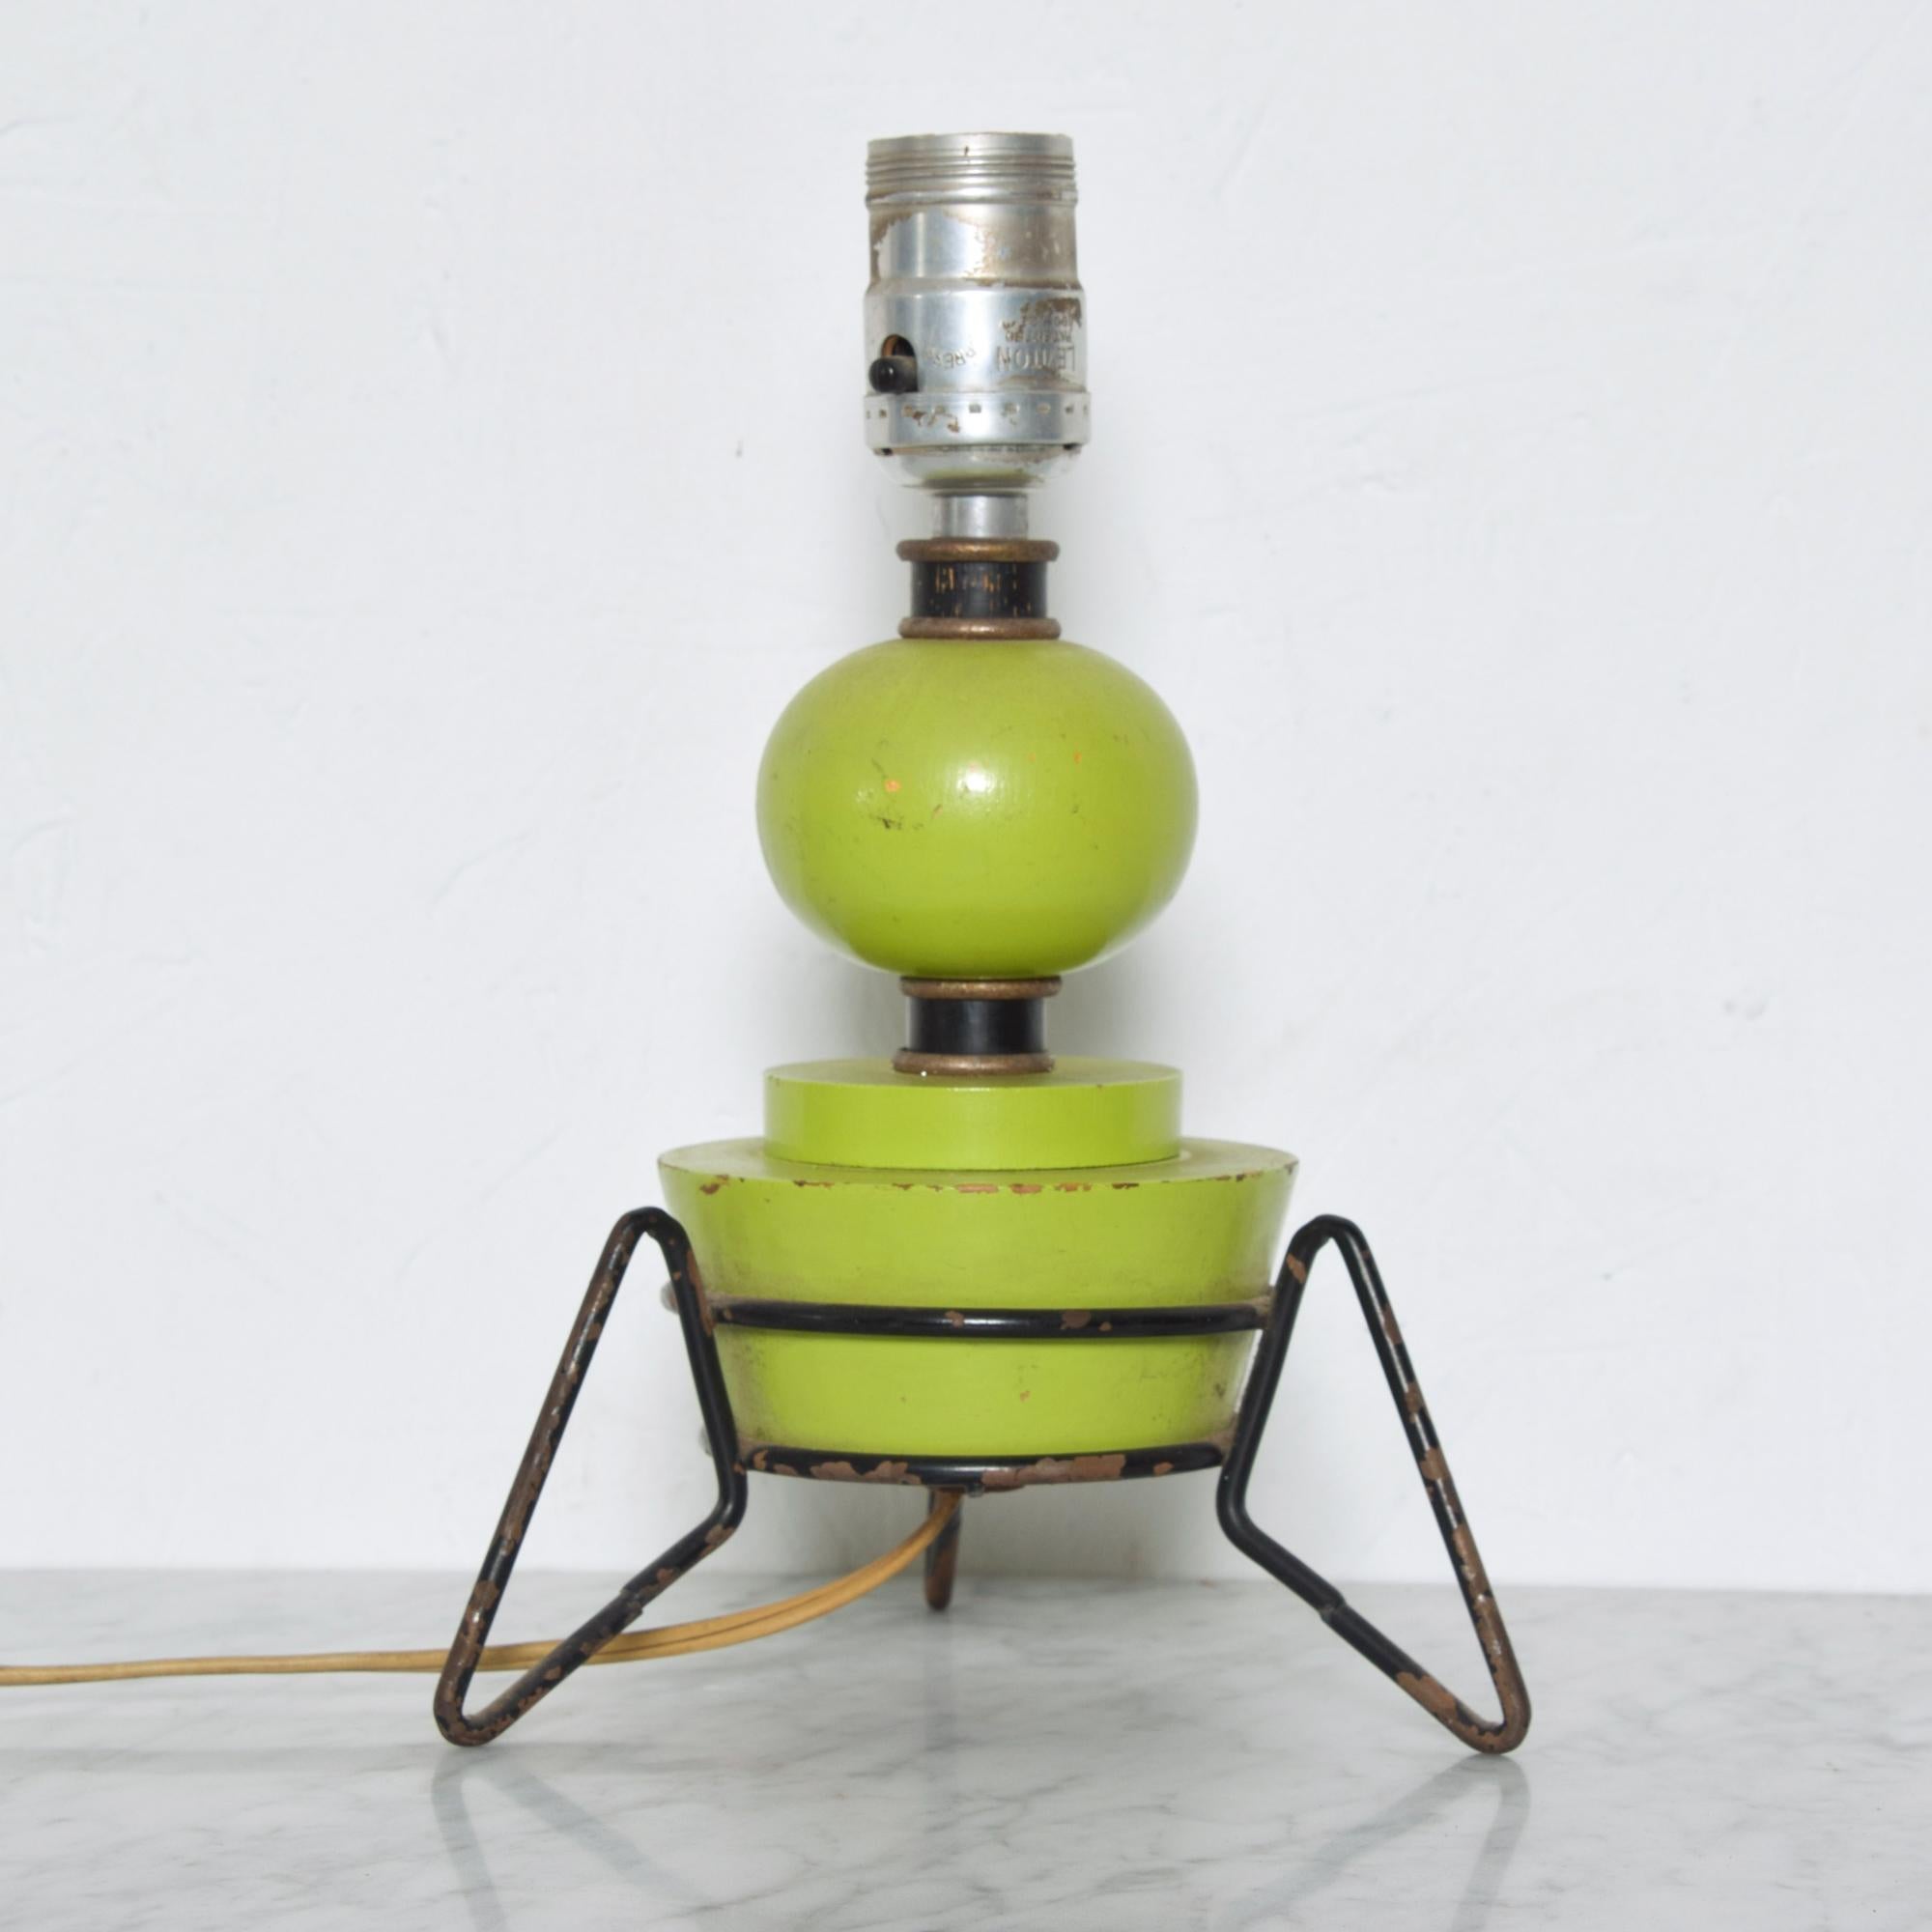 MCM California experimentation lighting in geometric wood form. Fabulous lime green color on a tripod iron base painted in black.
USA made circa the 1960s. Atomic design.
No label. Of Arthur Umanoff & Paul McCobb manner.
Measures: 9.5 tall (base